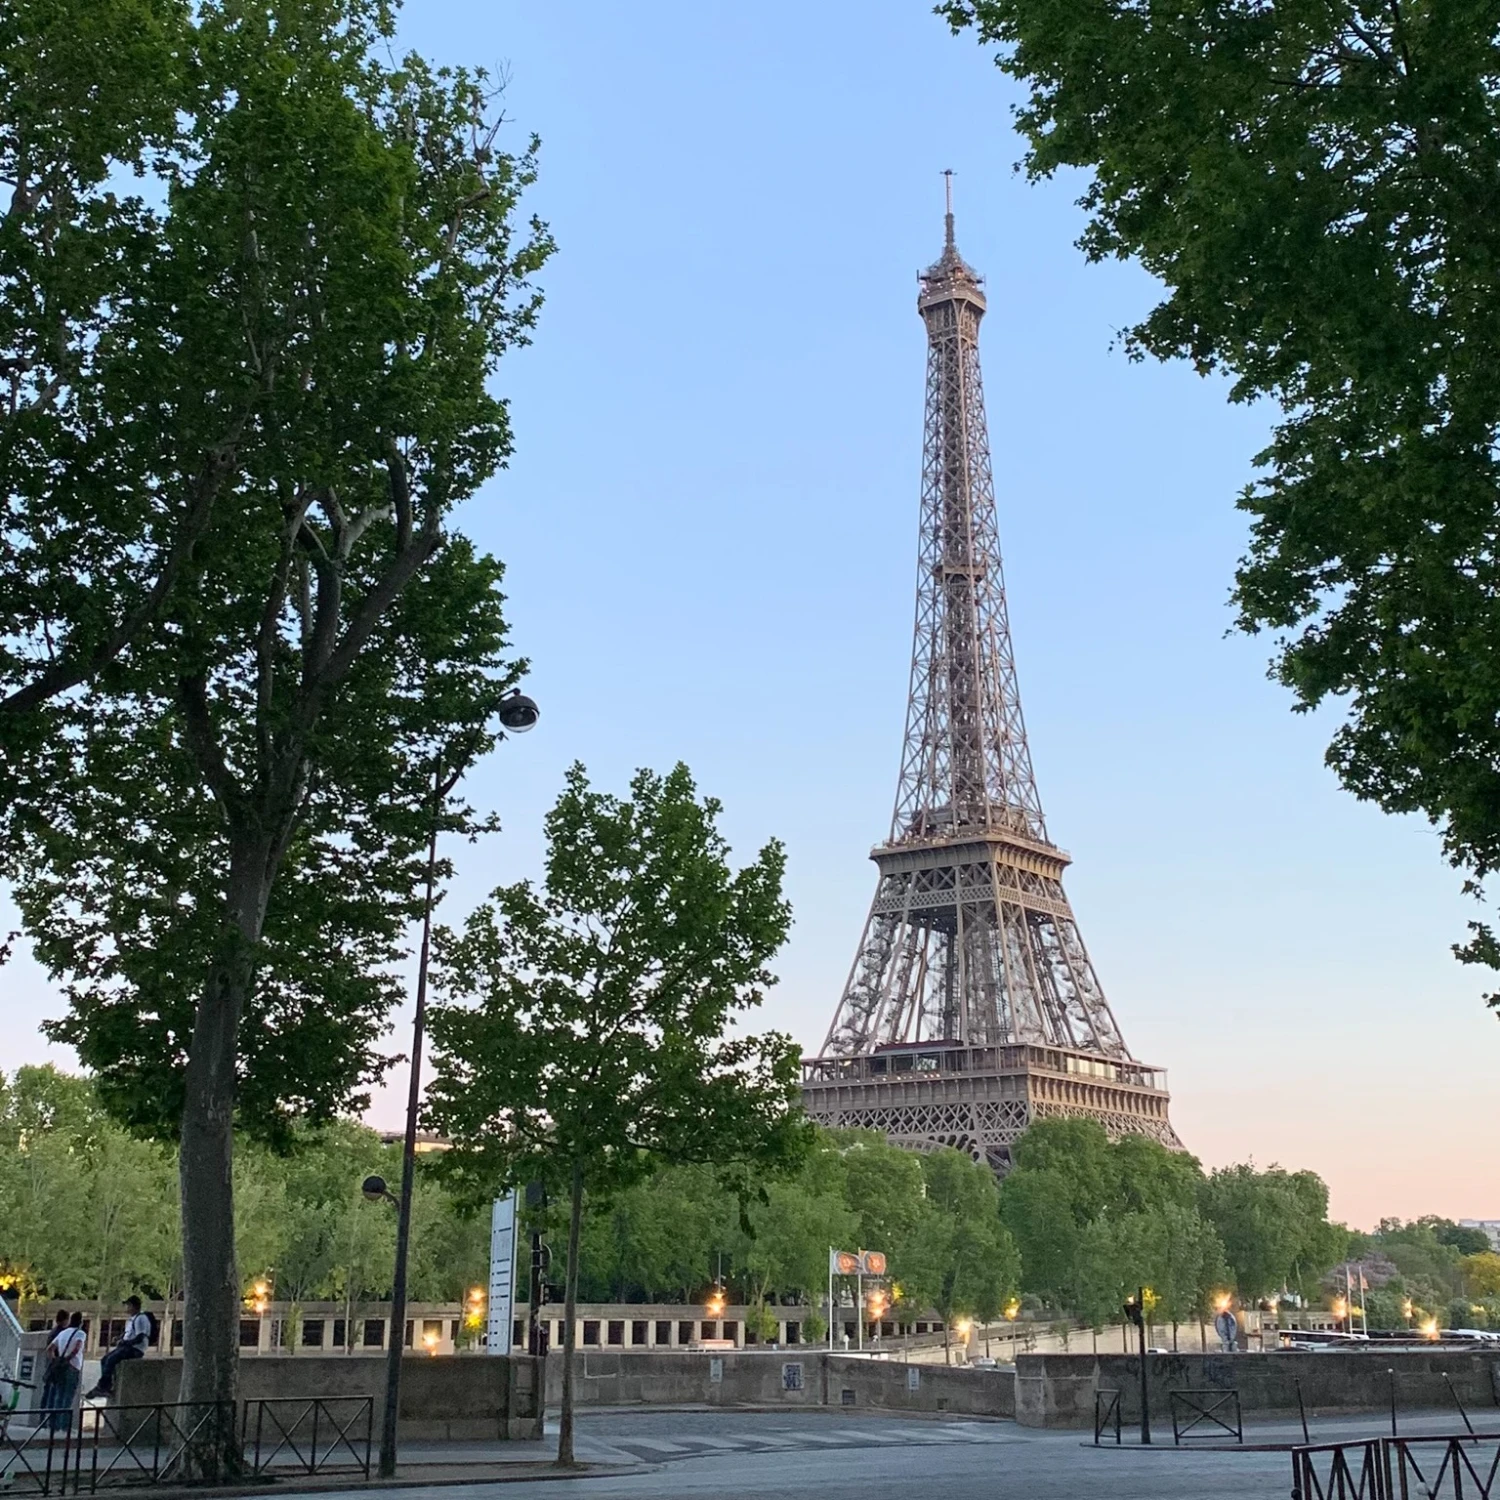 Travel Advisor Meaghan Barretto's photo of the Eiffel Tower.